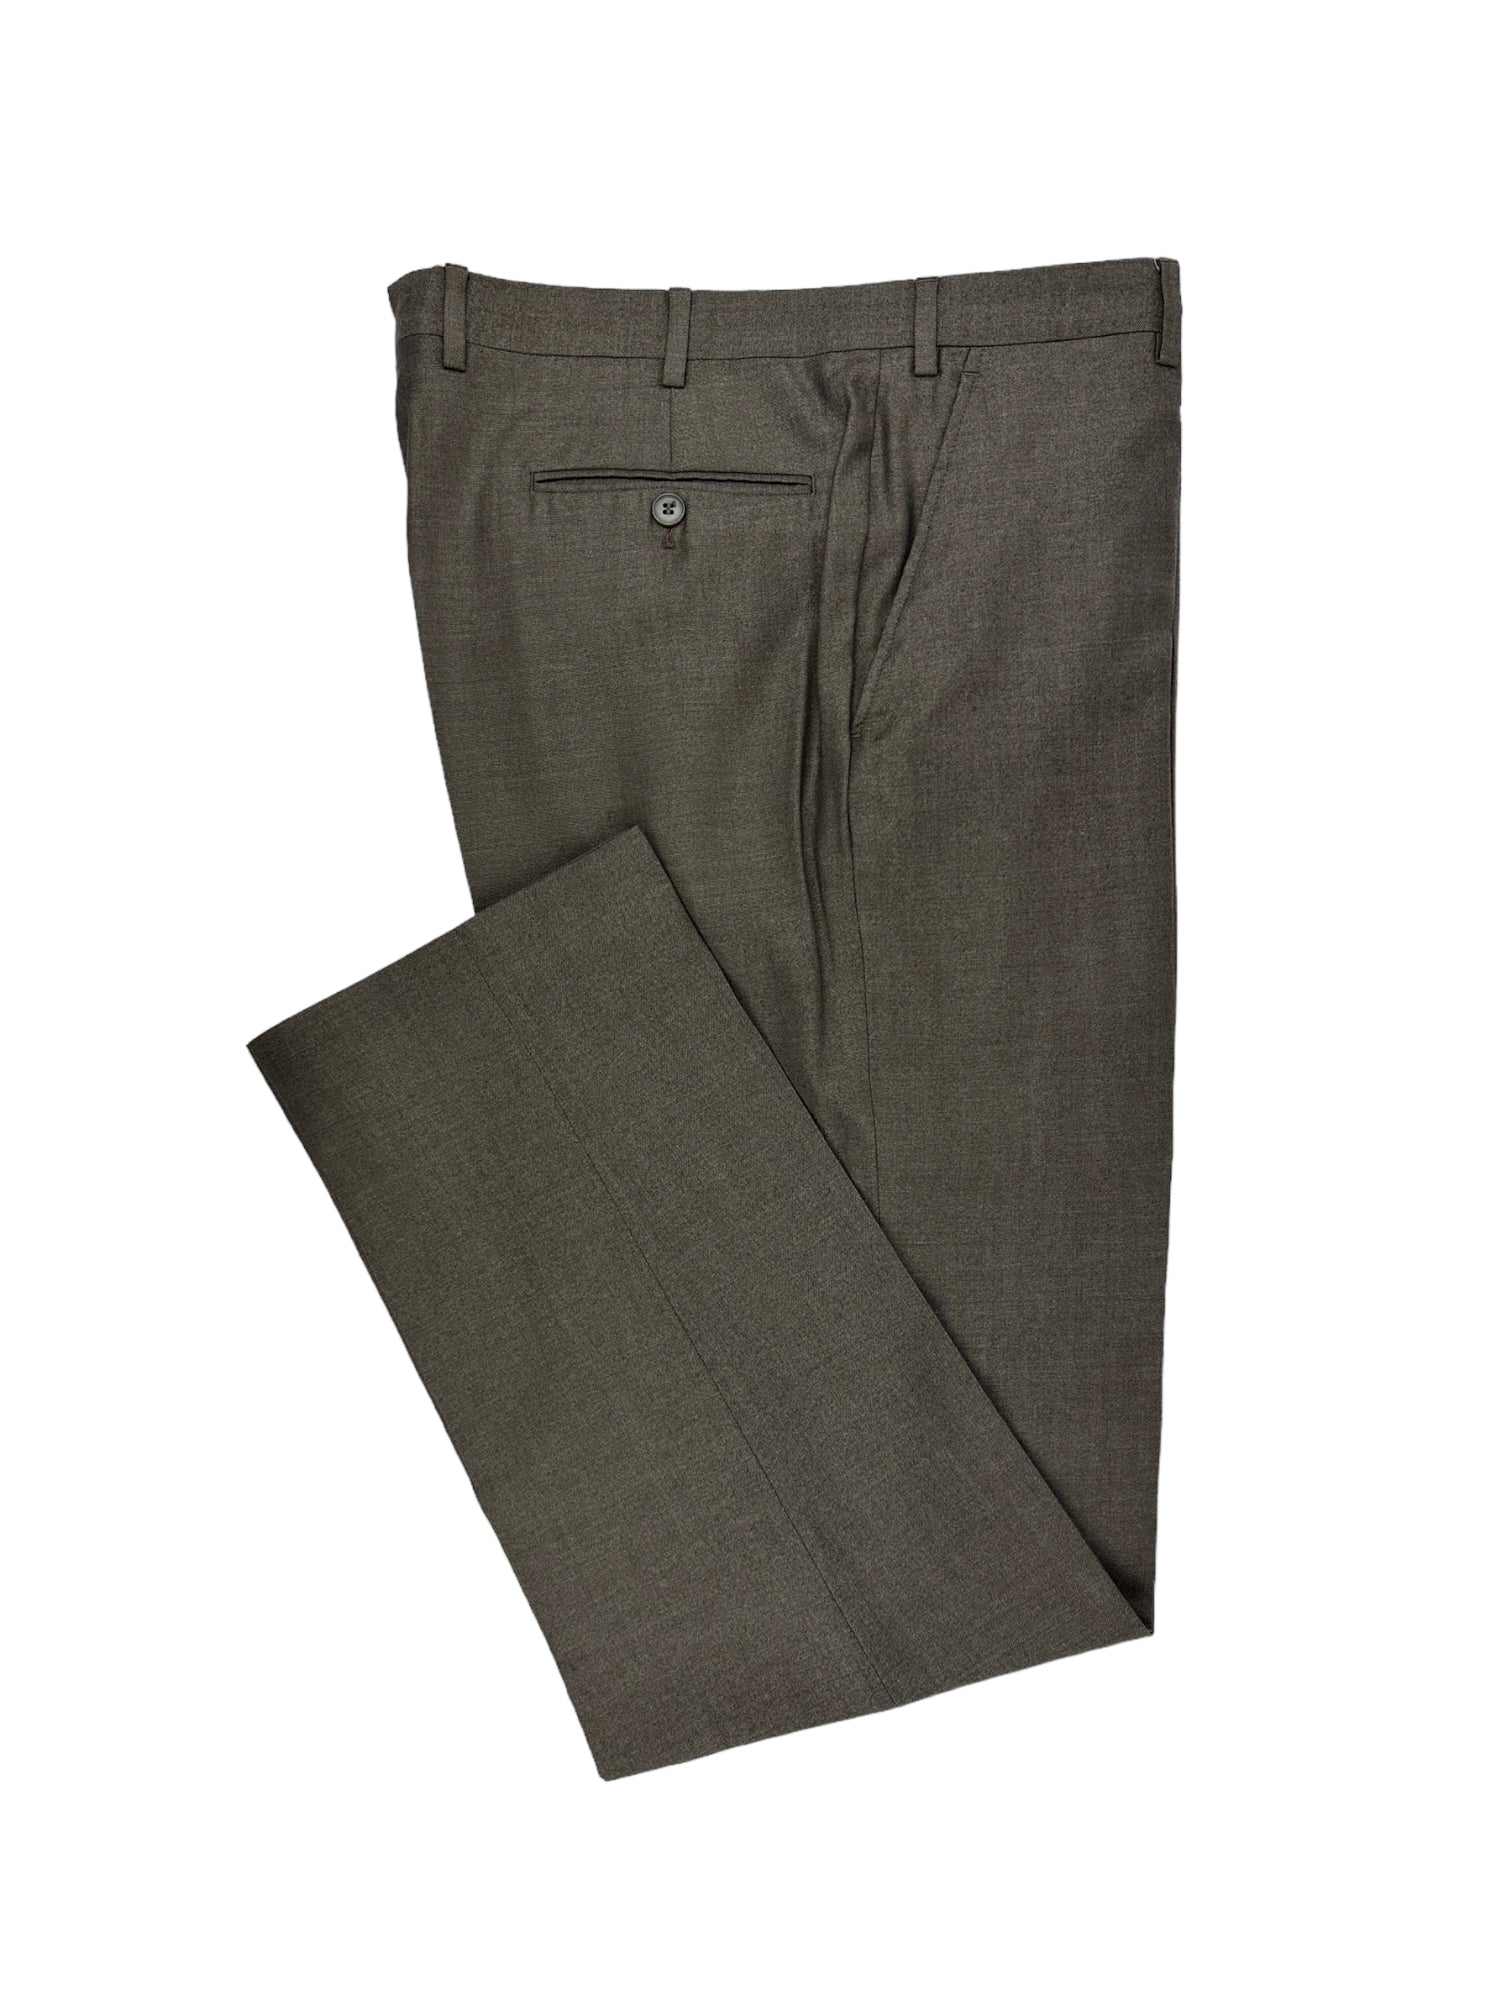 Brioni Taupe Wool & Silk Trousers